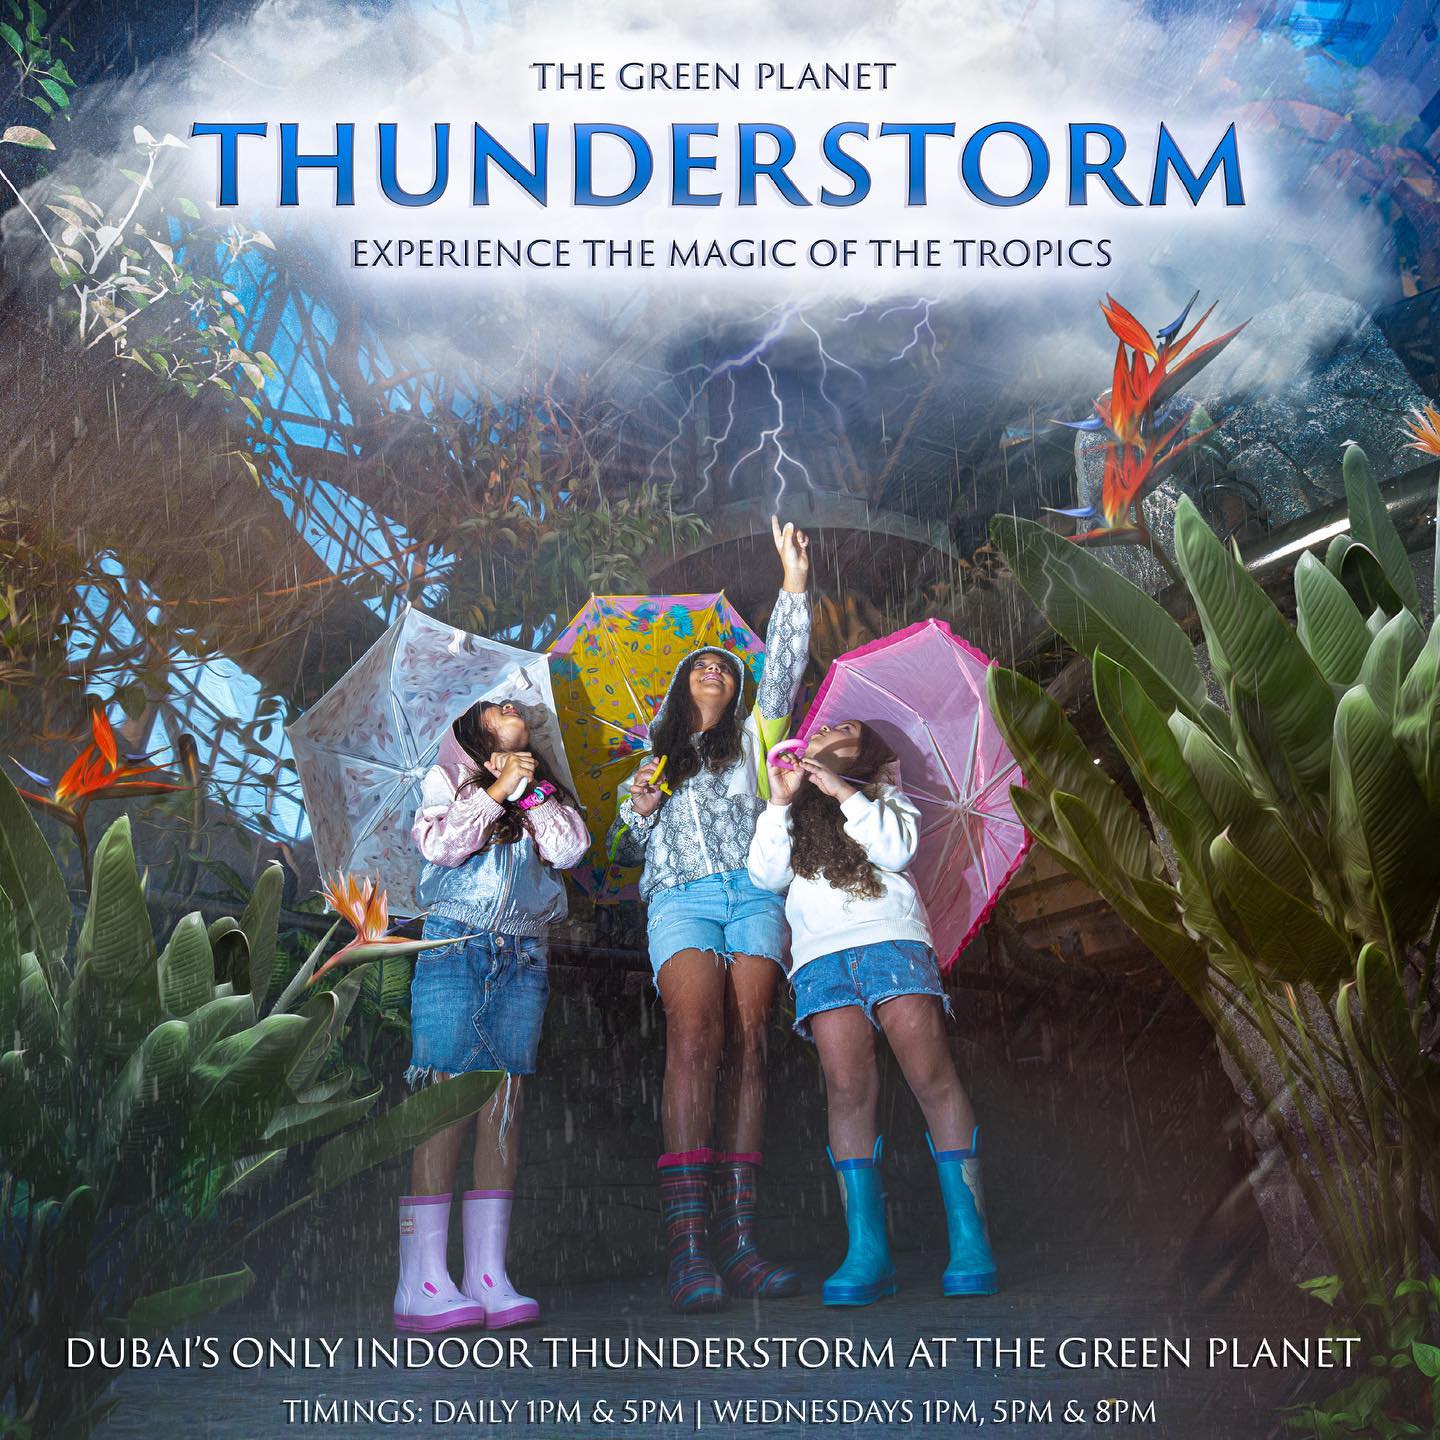 The Green Planet Thunderstorm Offer